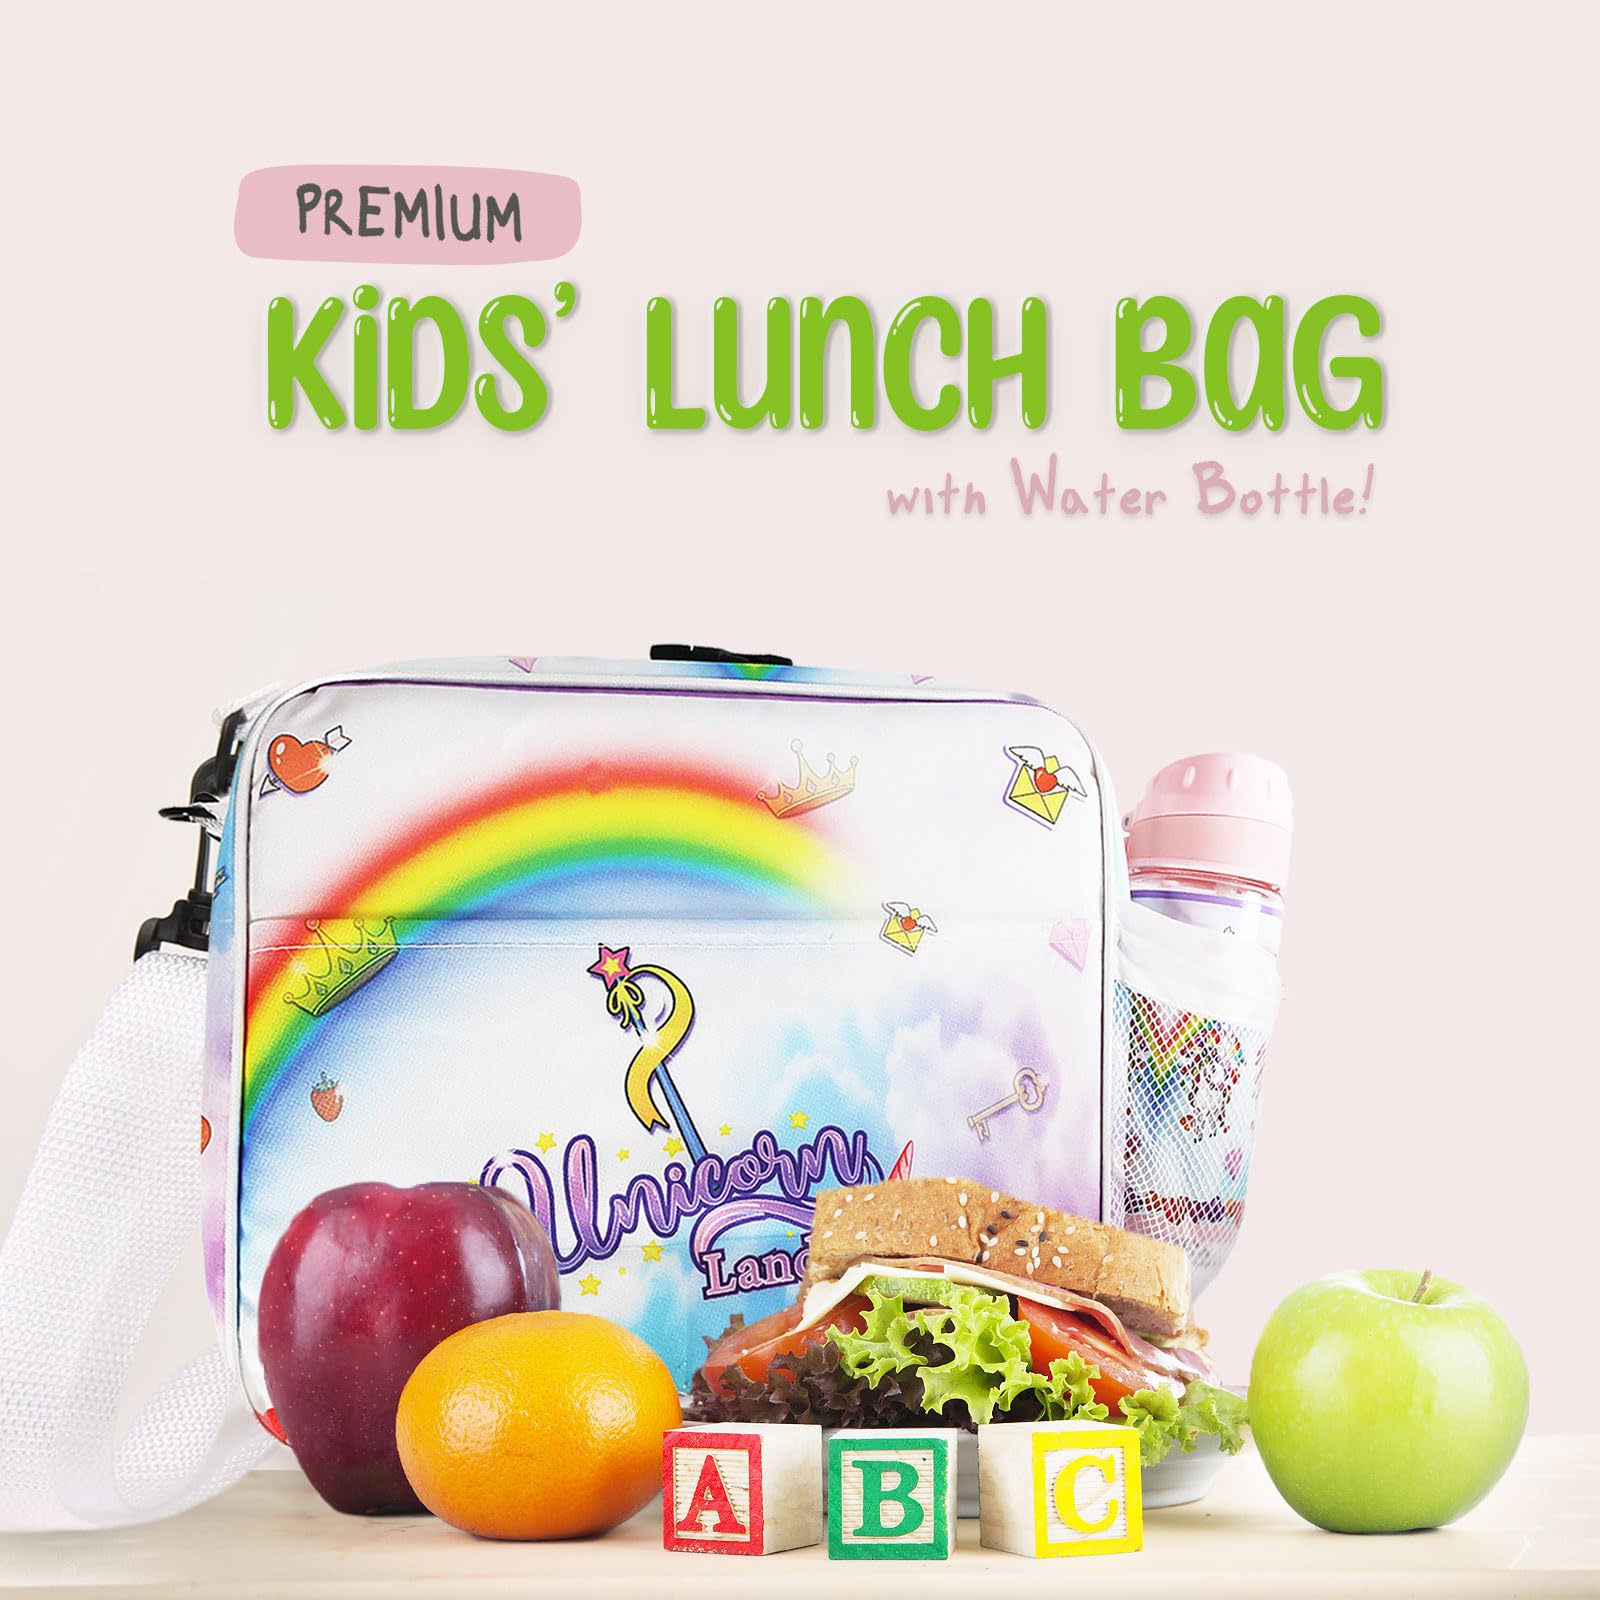 Kids Lunch Bag - Insulated Lunch Bag Kids with Water Bottle Holder